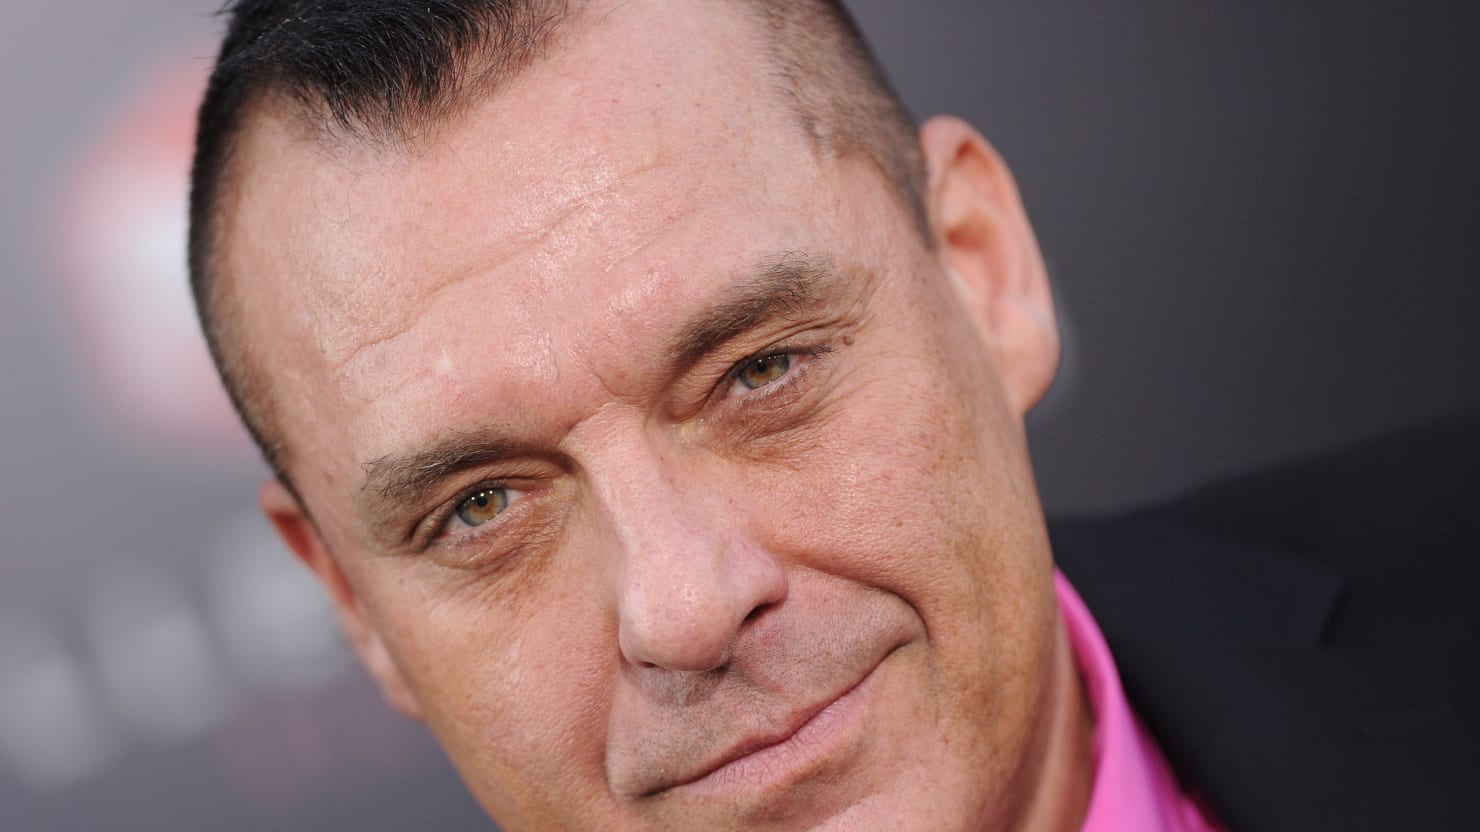 Tom Sizemores Revenge On Tom Cruises Scientology Recruitment, Drugs, and Craving a Comeback